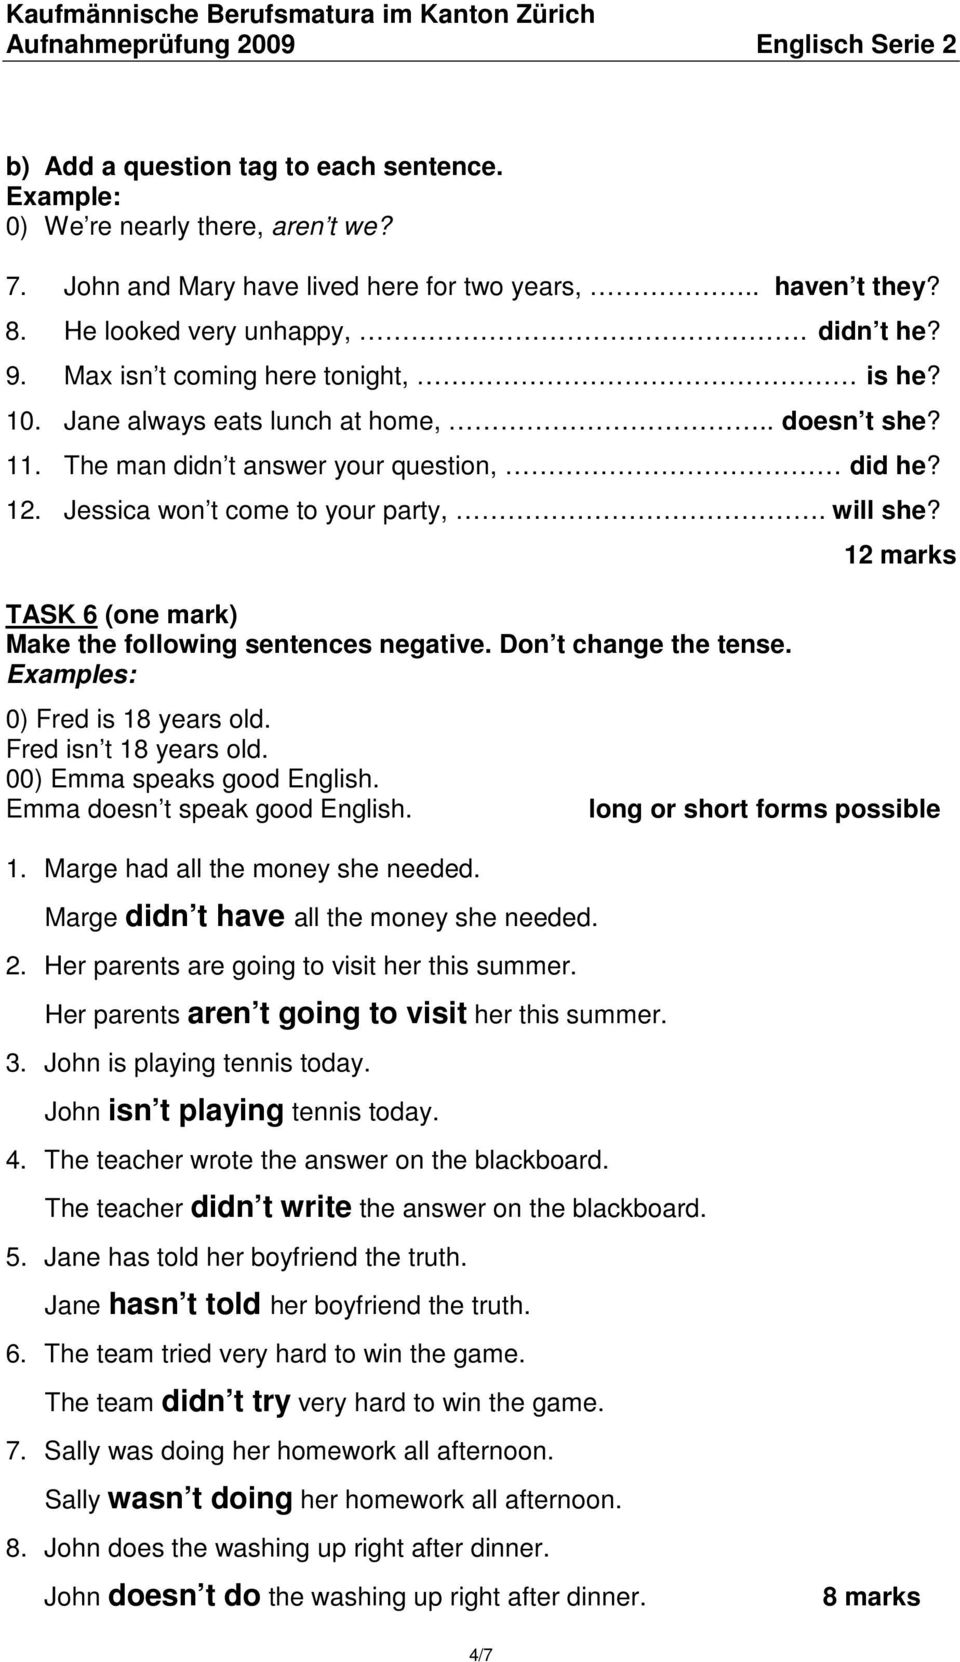 TASK 6 (one mark) Make the following sentences negative. Don t change the tense. Examples: 0) Fred is 18 years old. Fred isn t 18 years old. 00) Emma speaks good English.